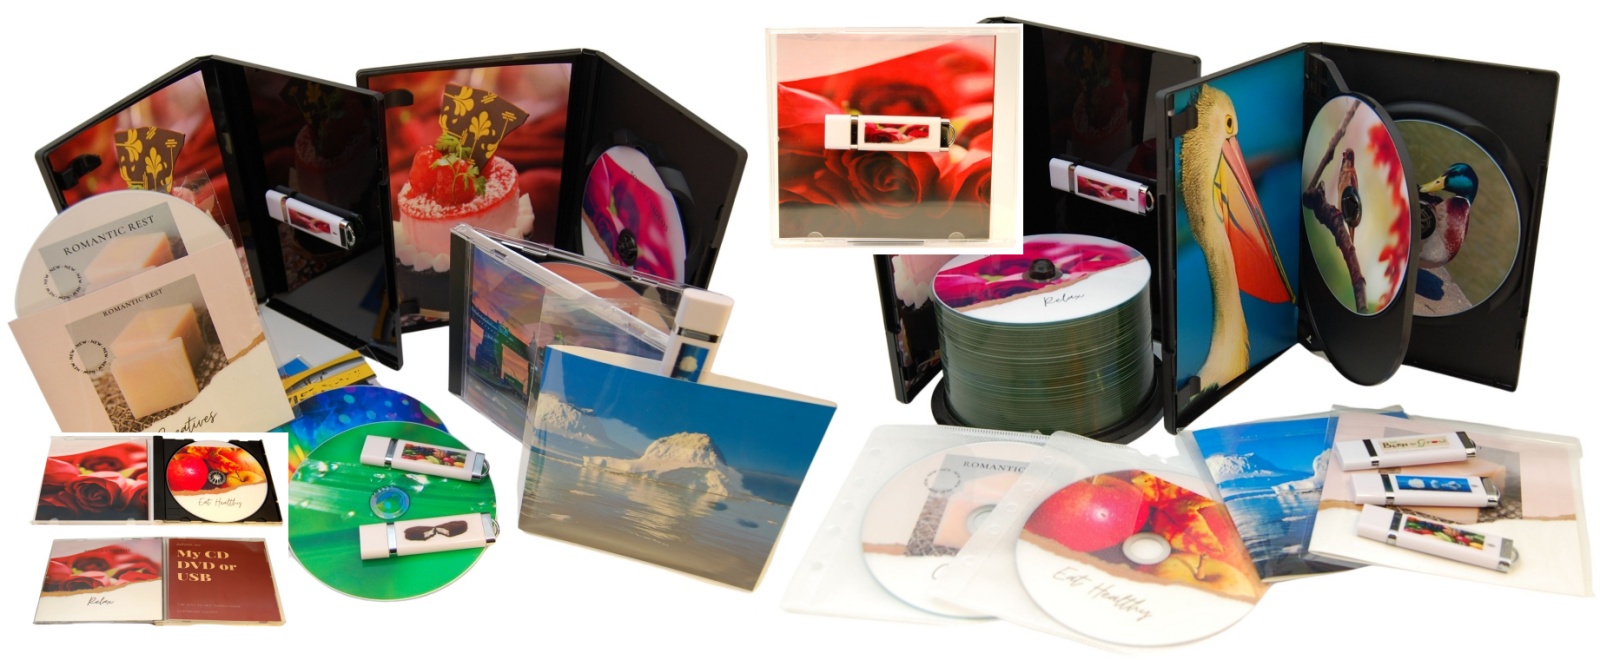 USB Flash Drive Packaging CD/DVD Case Style